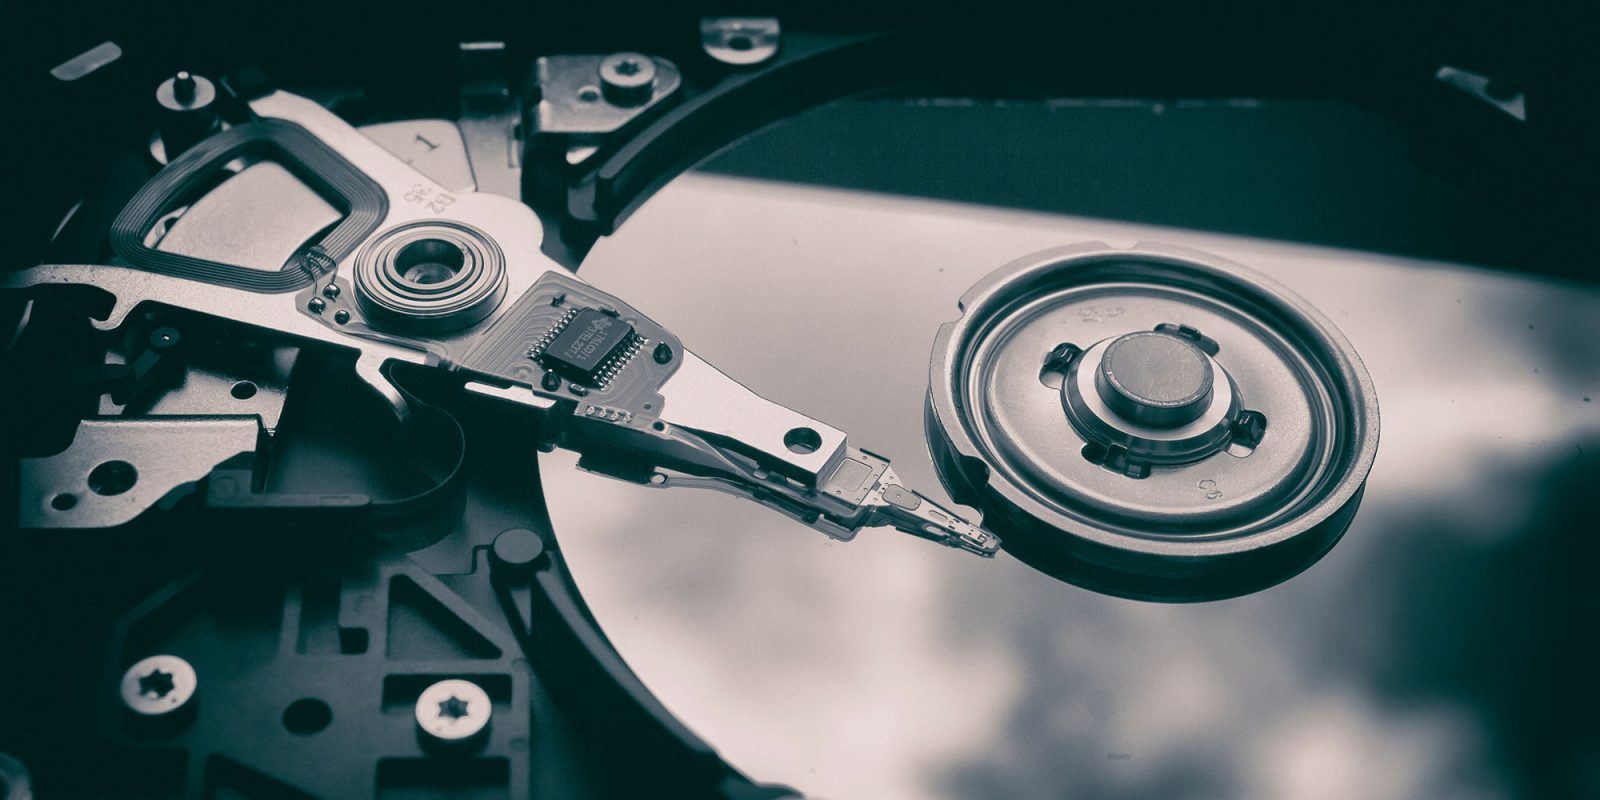 Wise customer data likely compromised | Inside of a hard drive